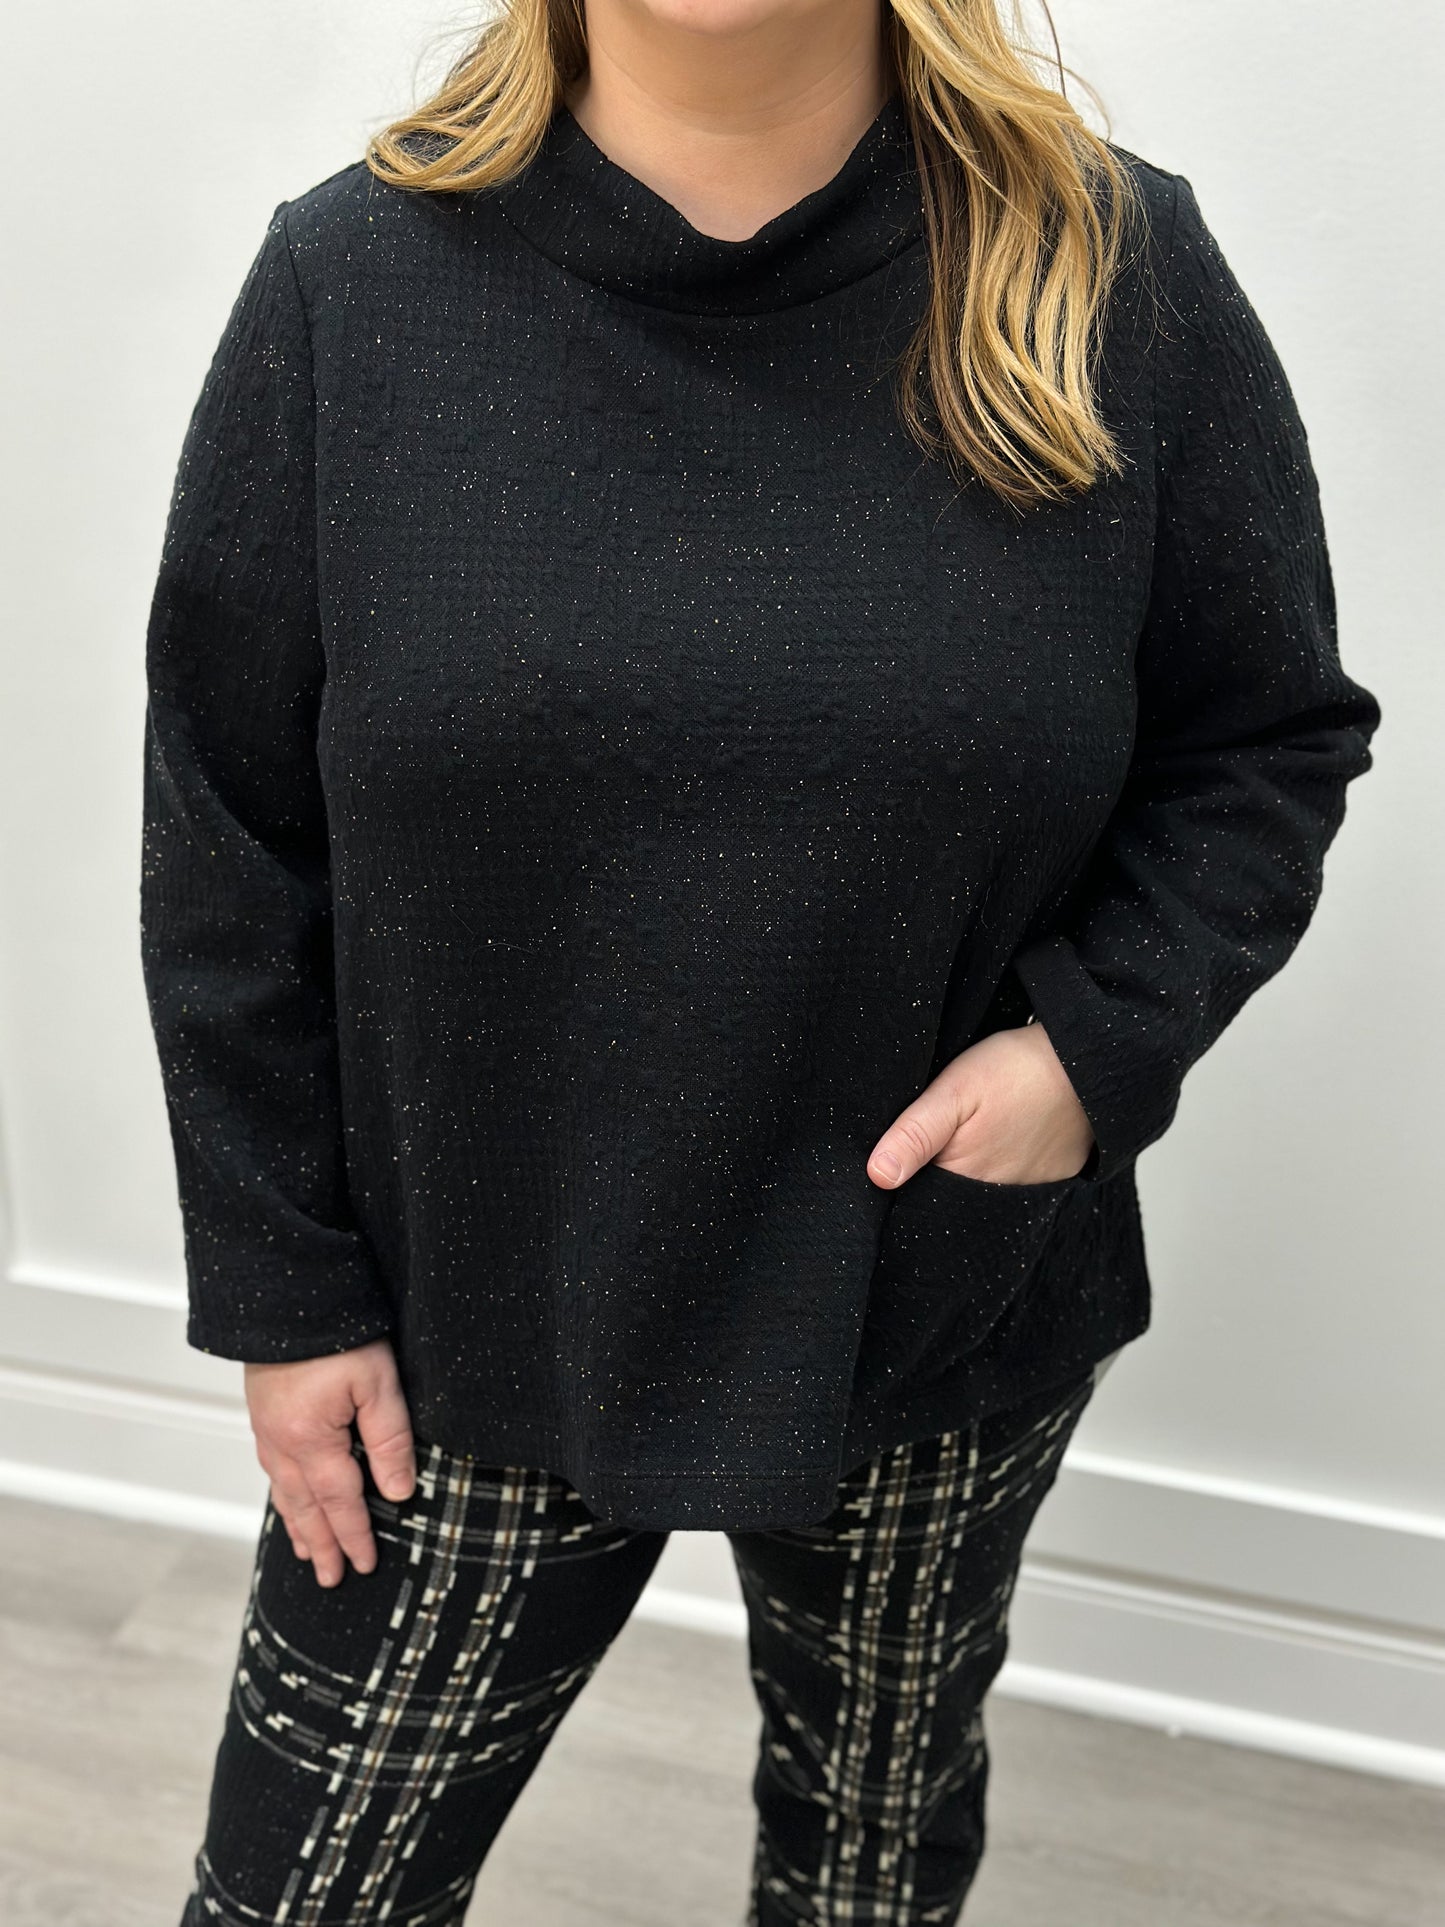 Cotton Luxe Speckle Knit Pullover - Speckle Sweatshirts + Pullovers Habitat   